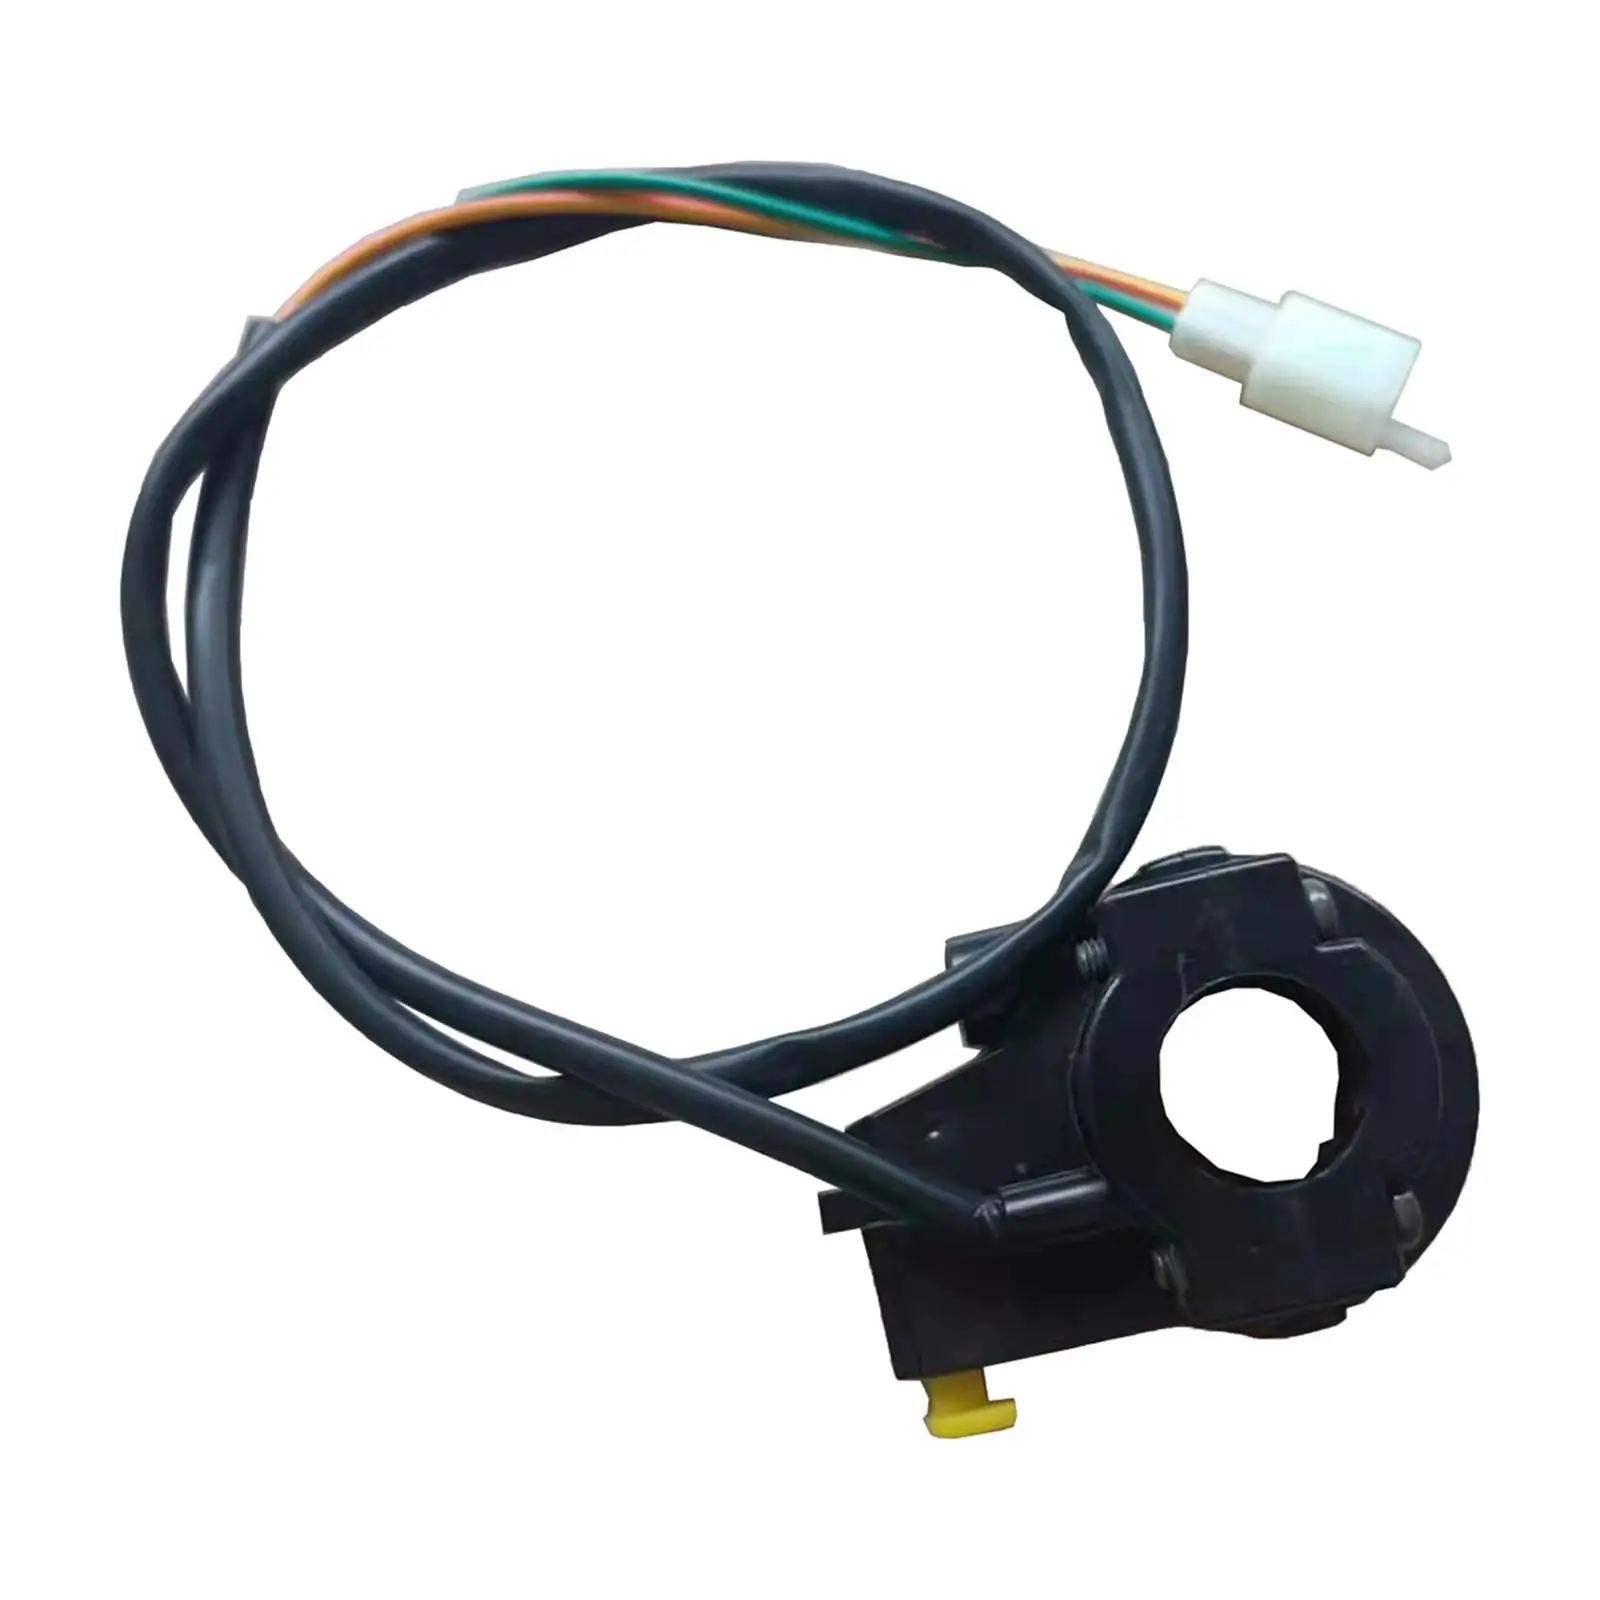 Motorcycle Engine Start Kill Switch Handlebars Mount for Scooter Quad